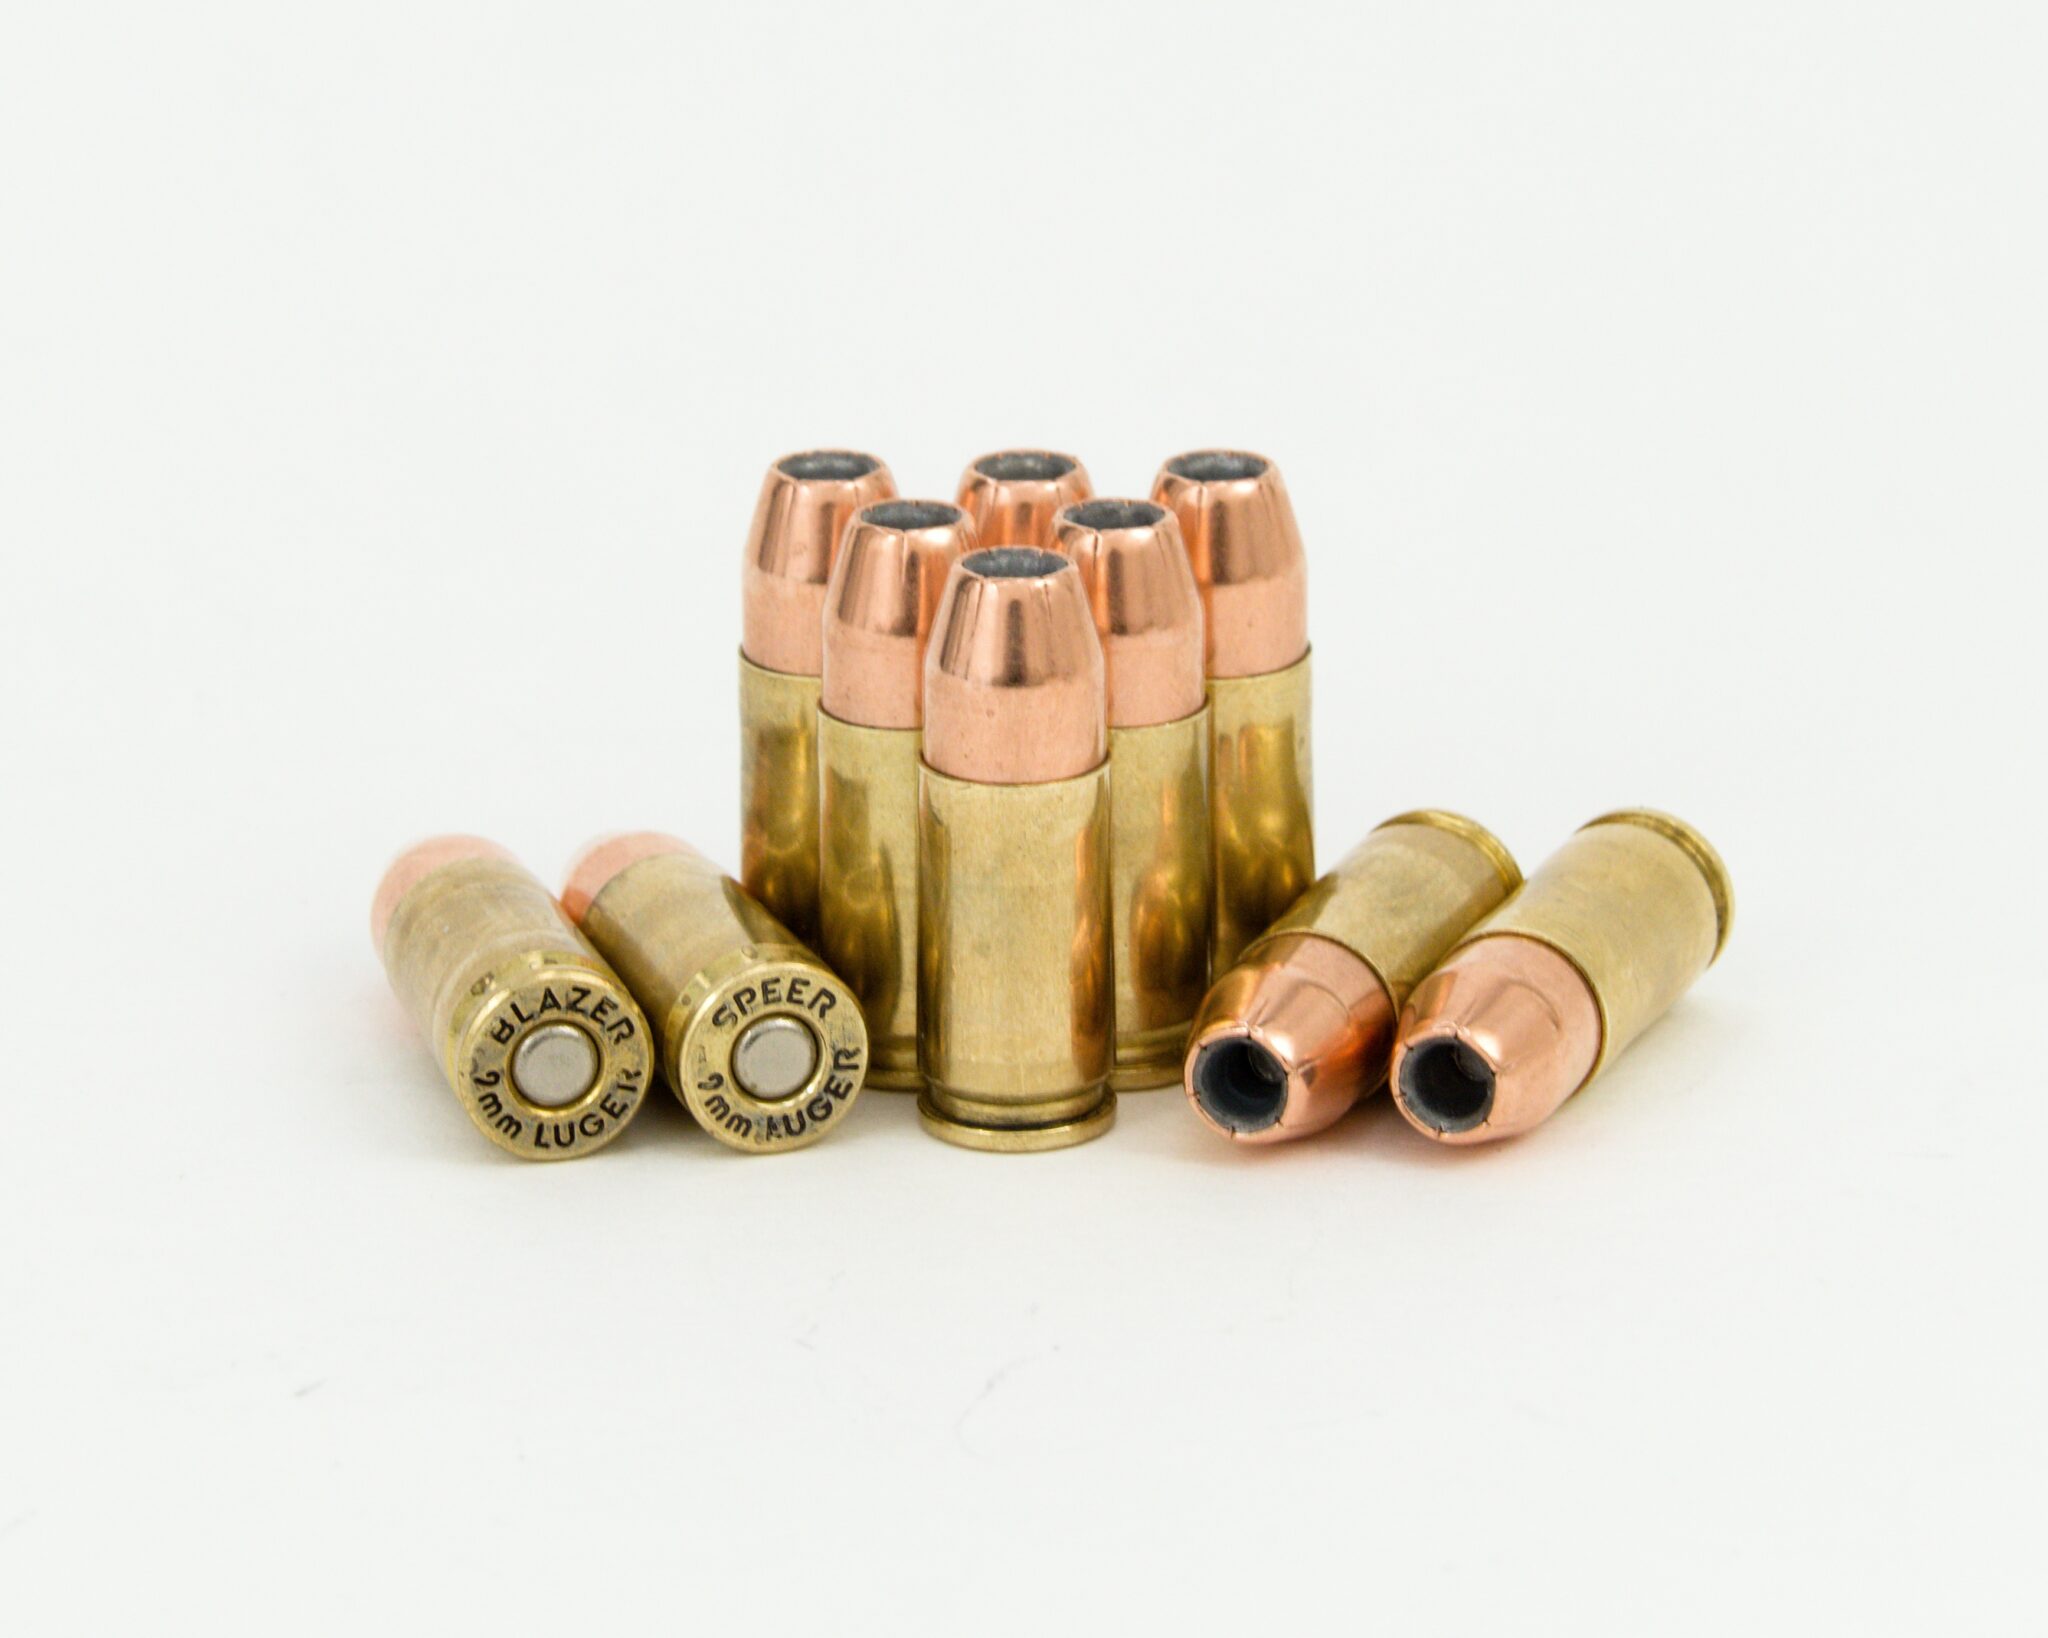 9mm Luger Personal Defense Ammunition with 115 Grain Sierra Hollow ...